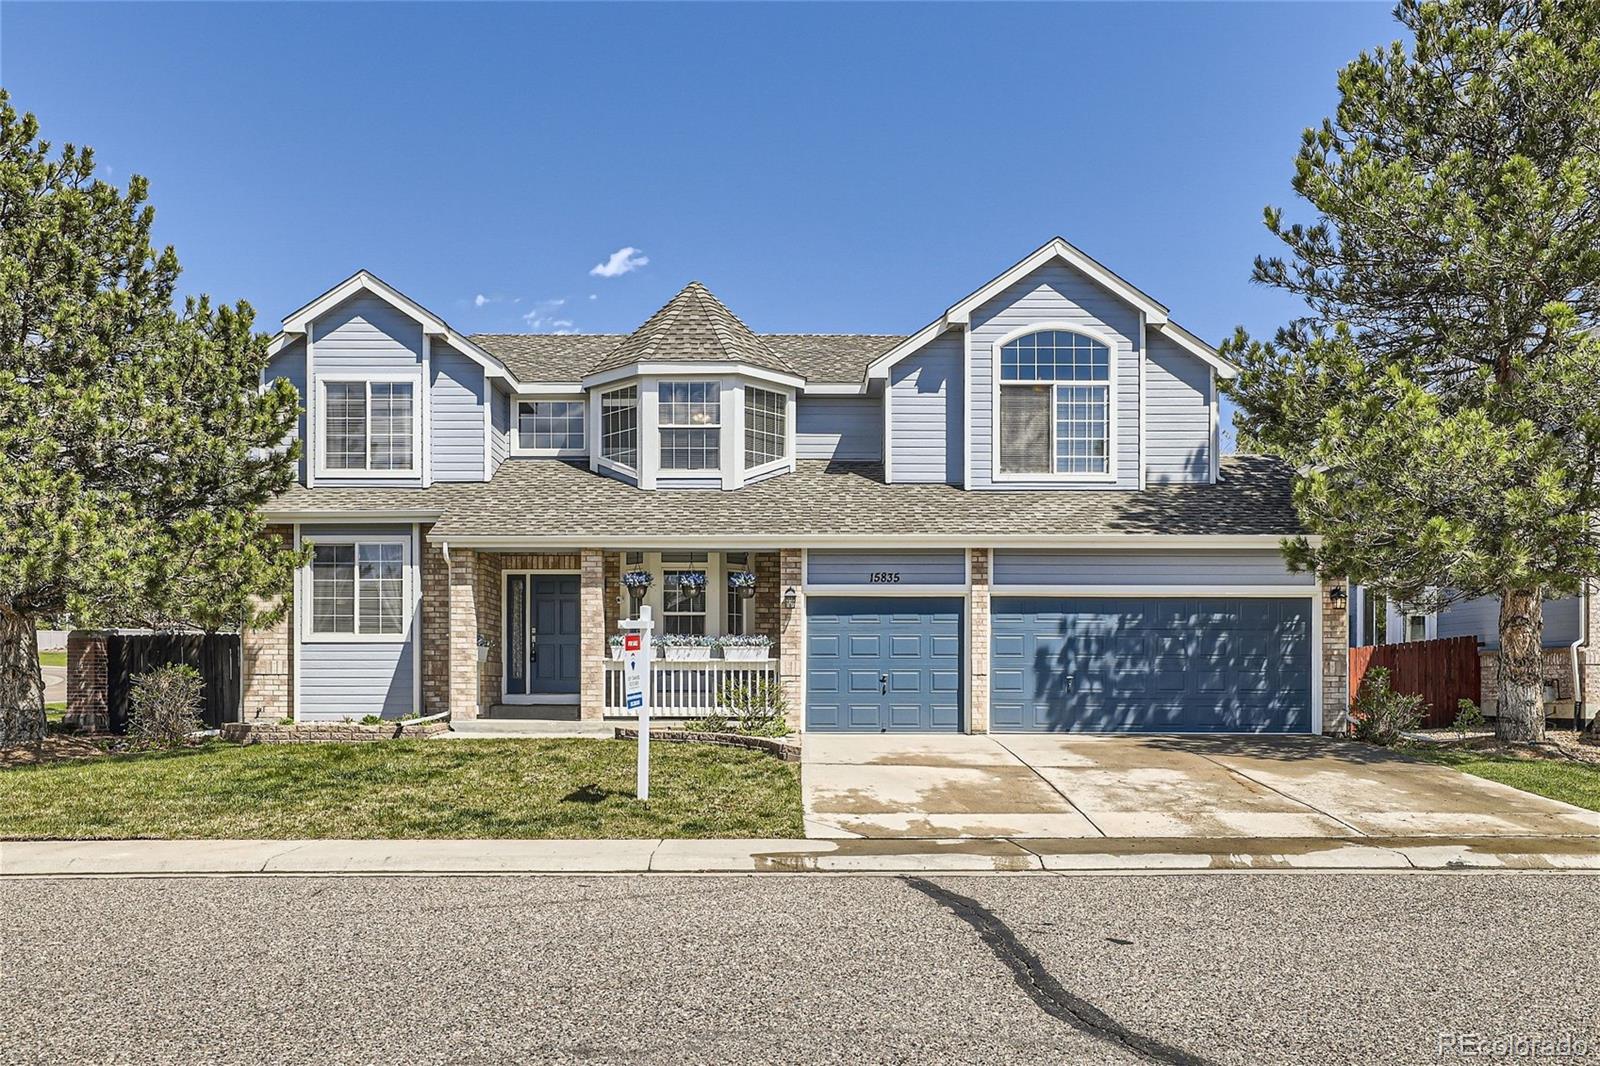 15835 W 71st Place, arvada MLS: 9332333 Beds: 6 Baths: 6 Price: $1,120,000